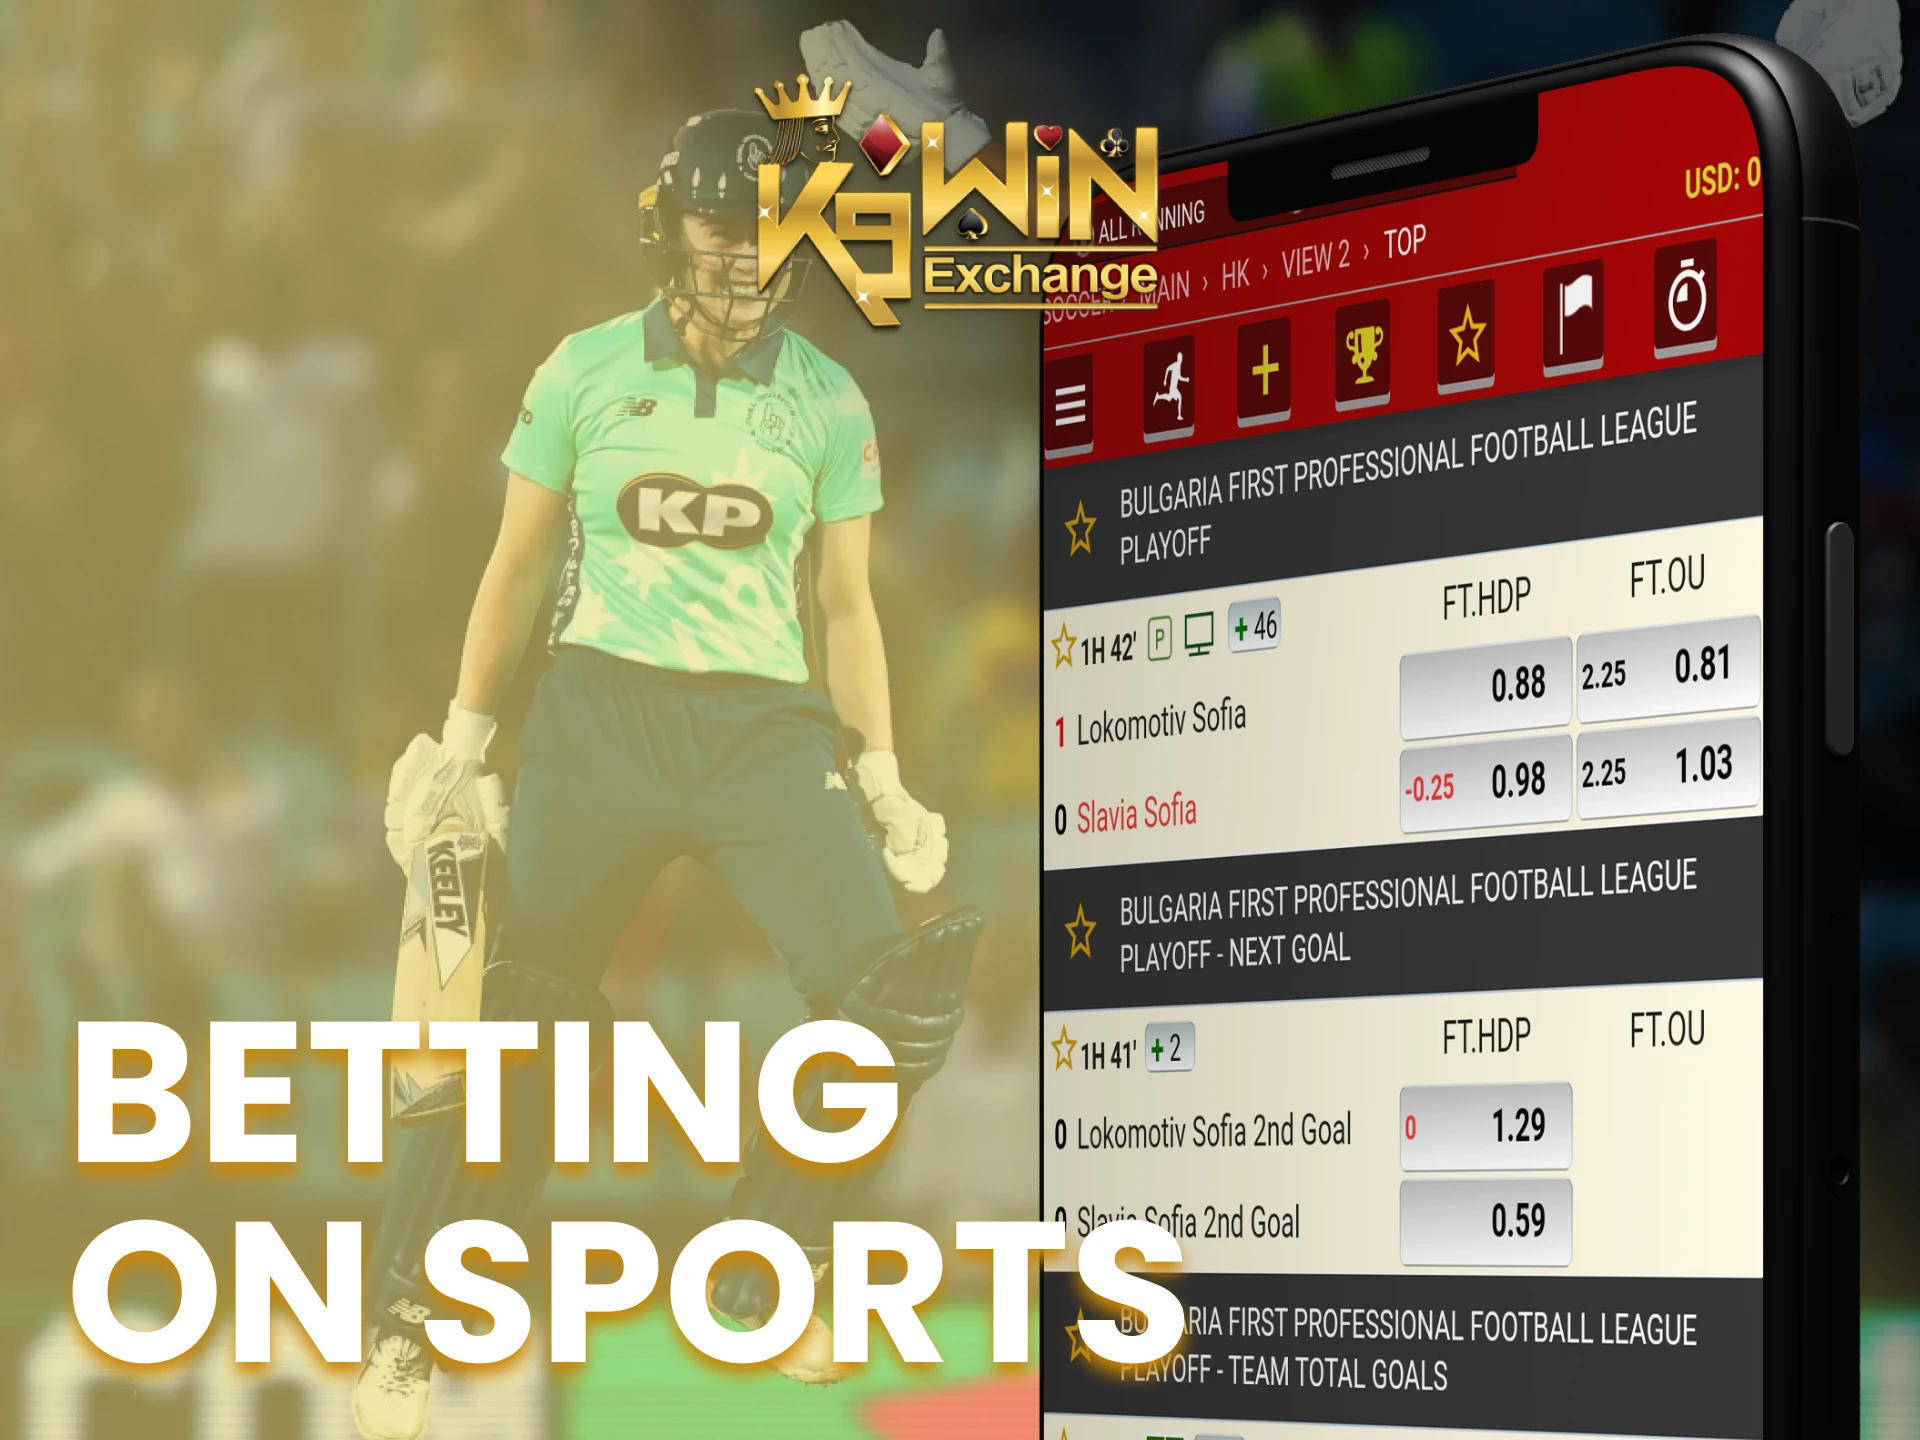 Make bets on sports quicker with the K9Win app.